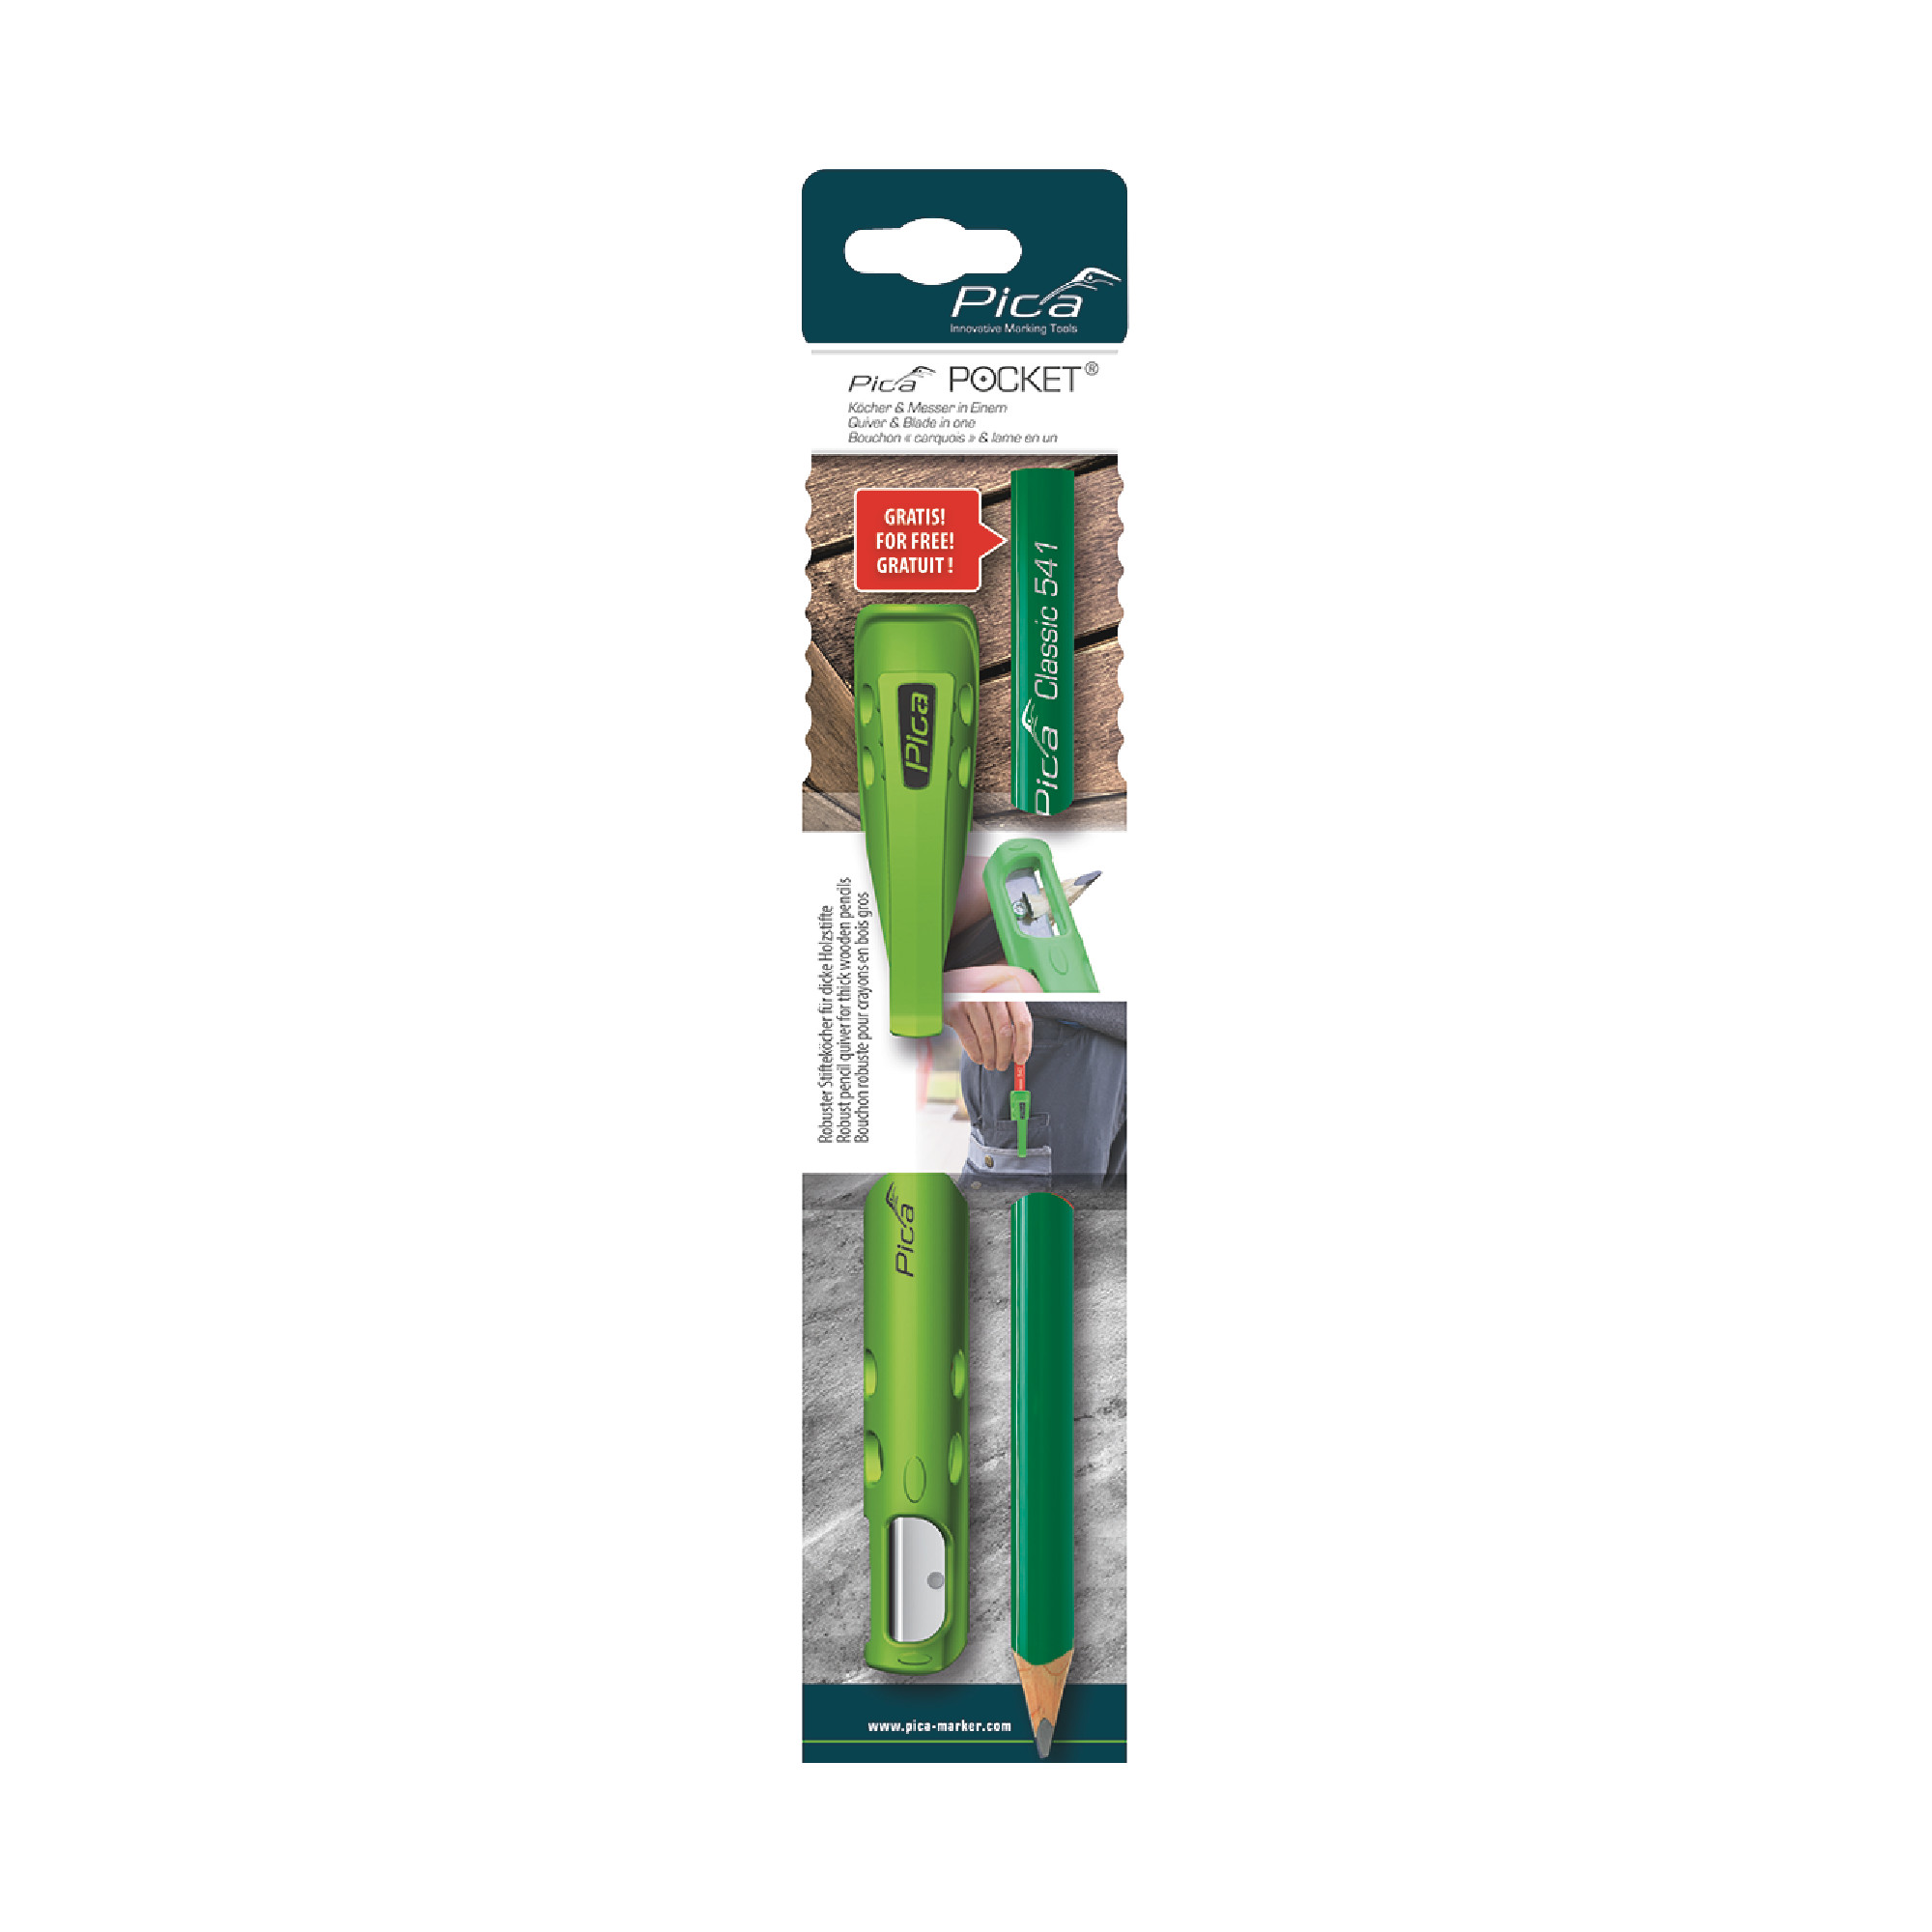 POCKET&reg; Quiver & Blade In One With 2 Pica Classic Stonemason Pencils